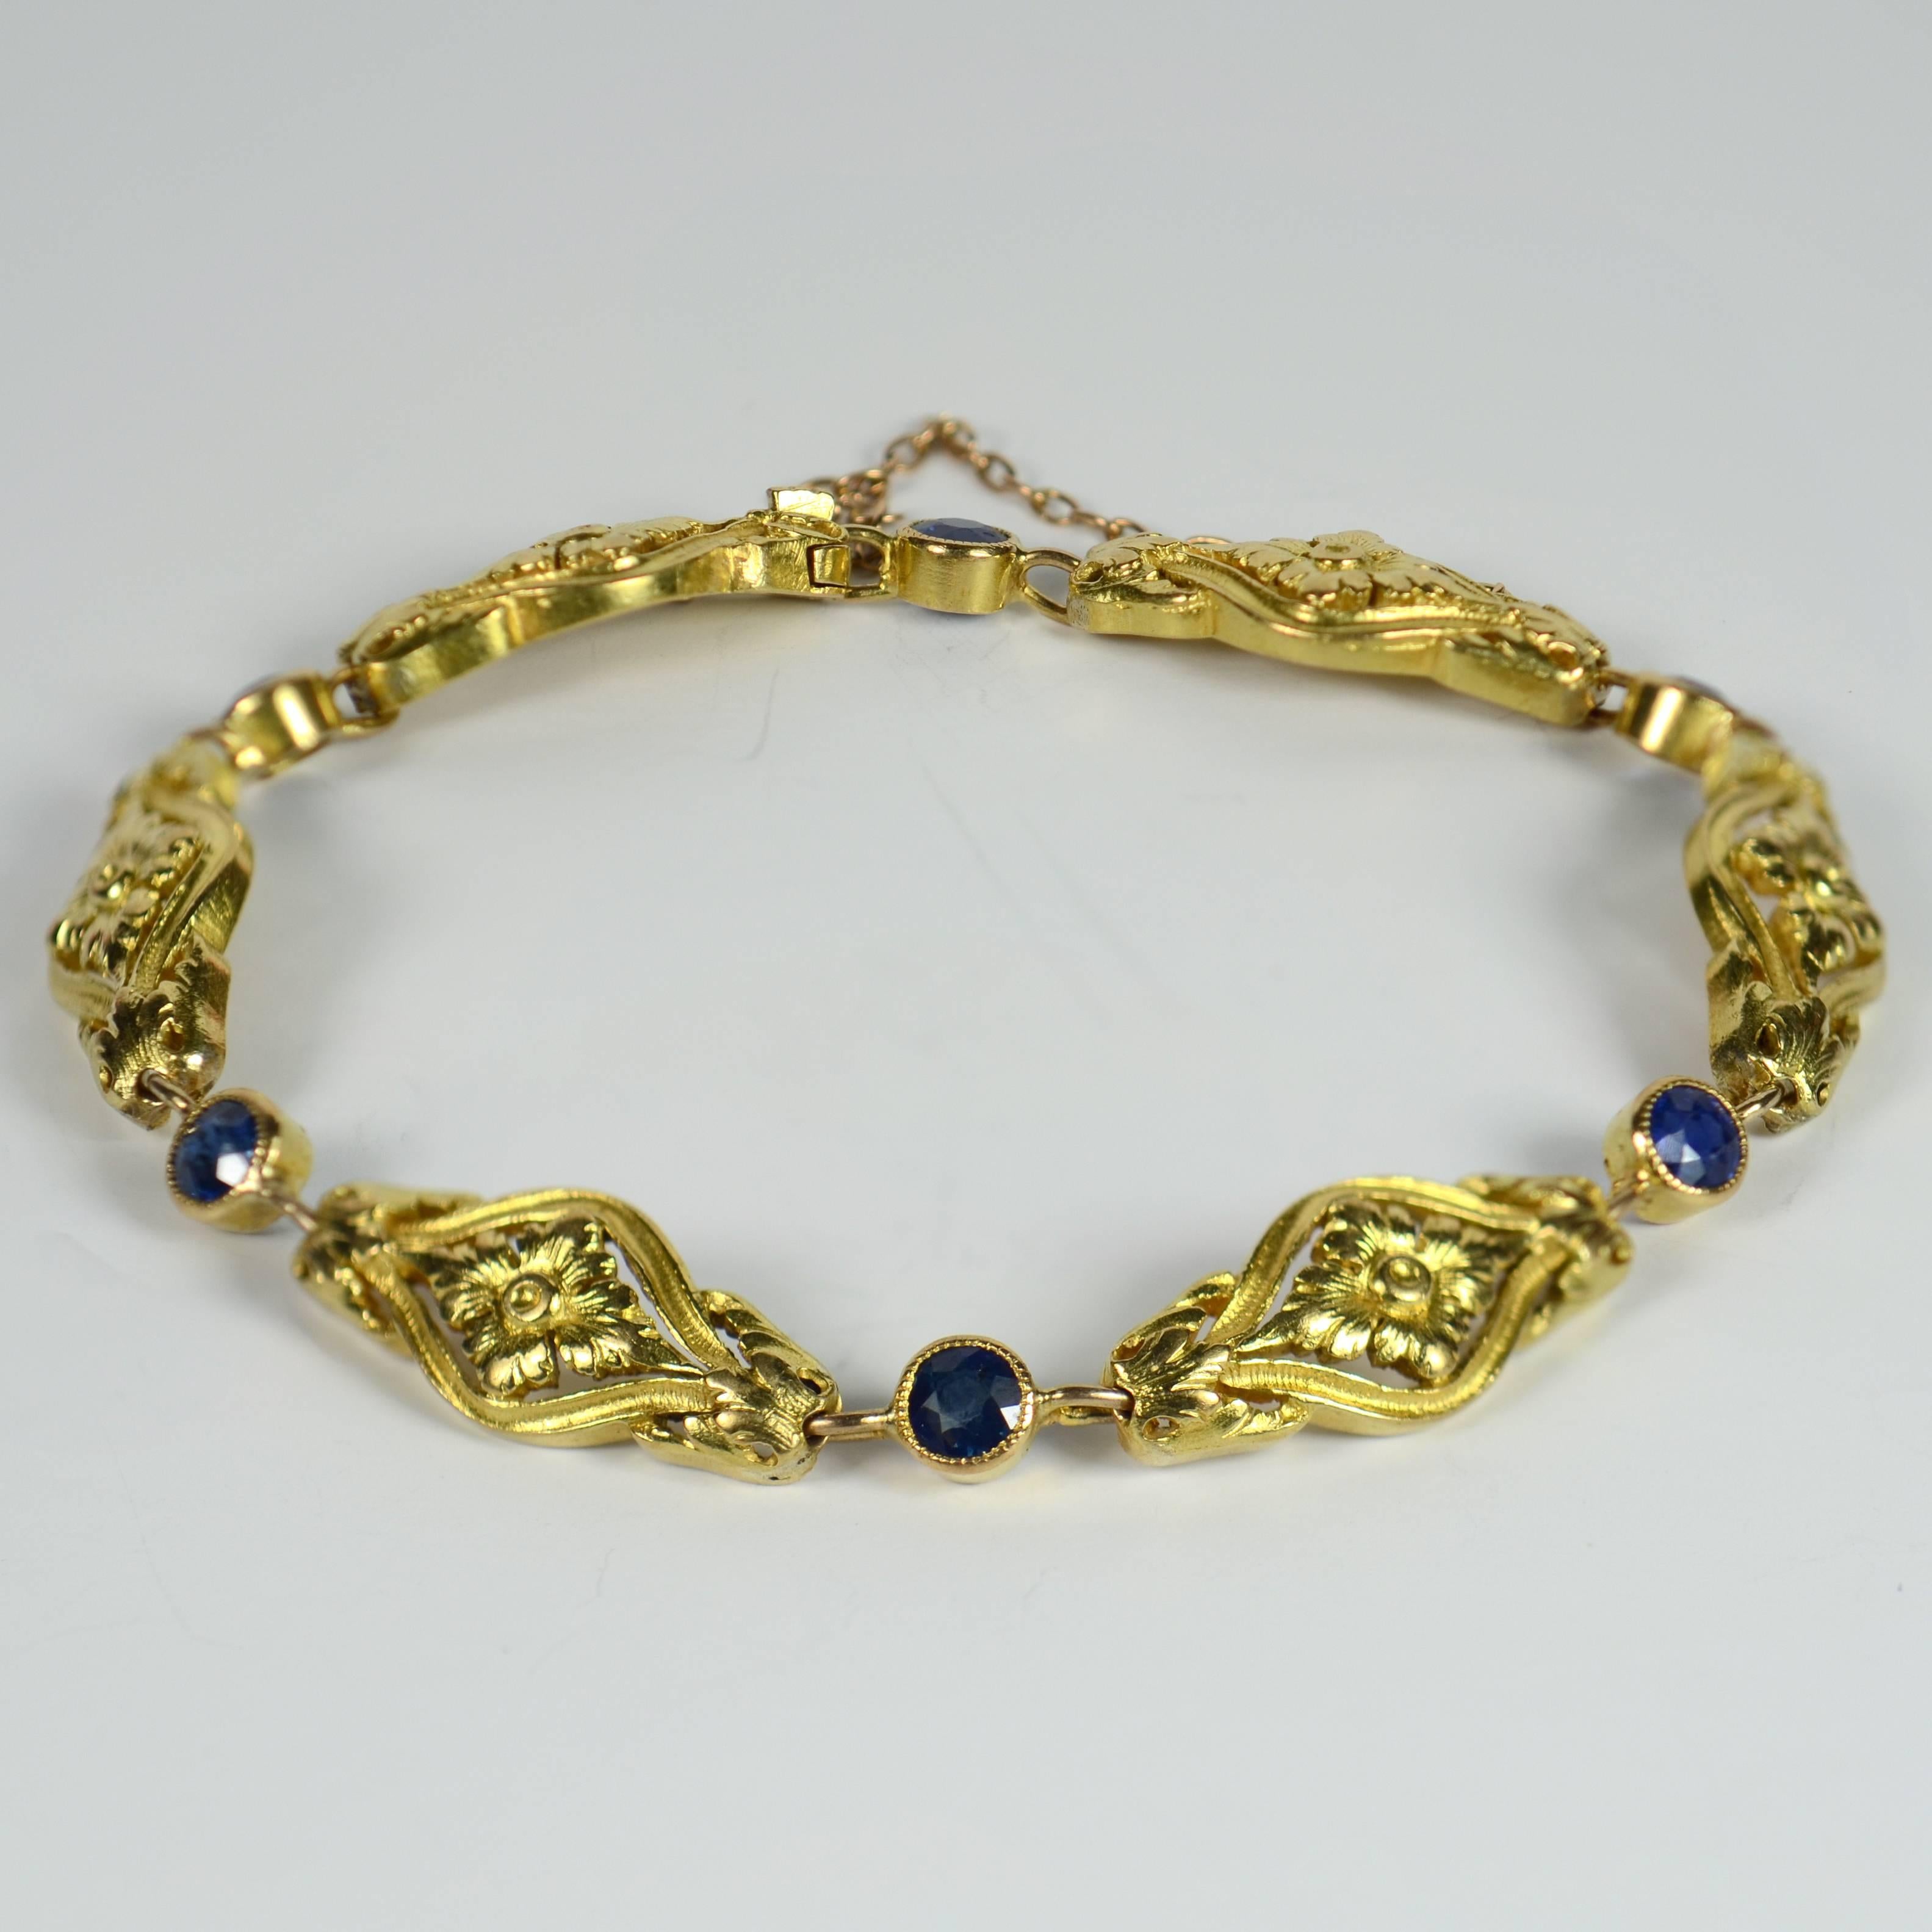 A pretty French 18 carat gold link bracelet in the Art Nouveau style set with 6 blue sapphires.  Each of the six gold links of this bracelet has a flower and leaf motif, interspaced with a blue sapphire in a millegrain setting.  

Each sapphire is